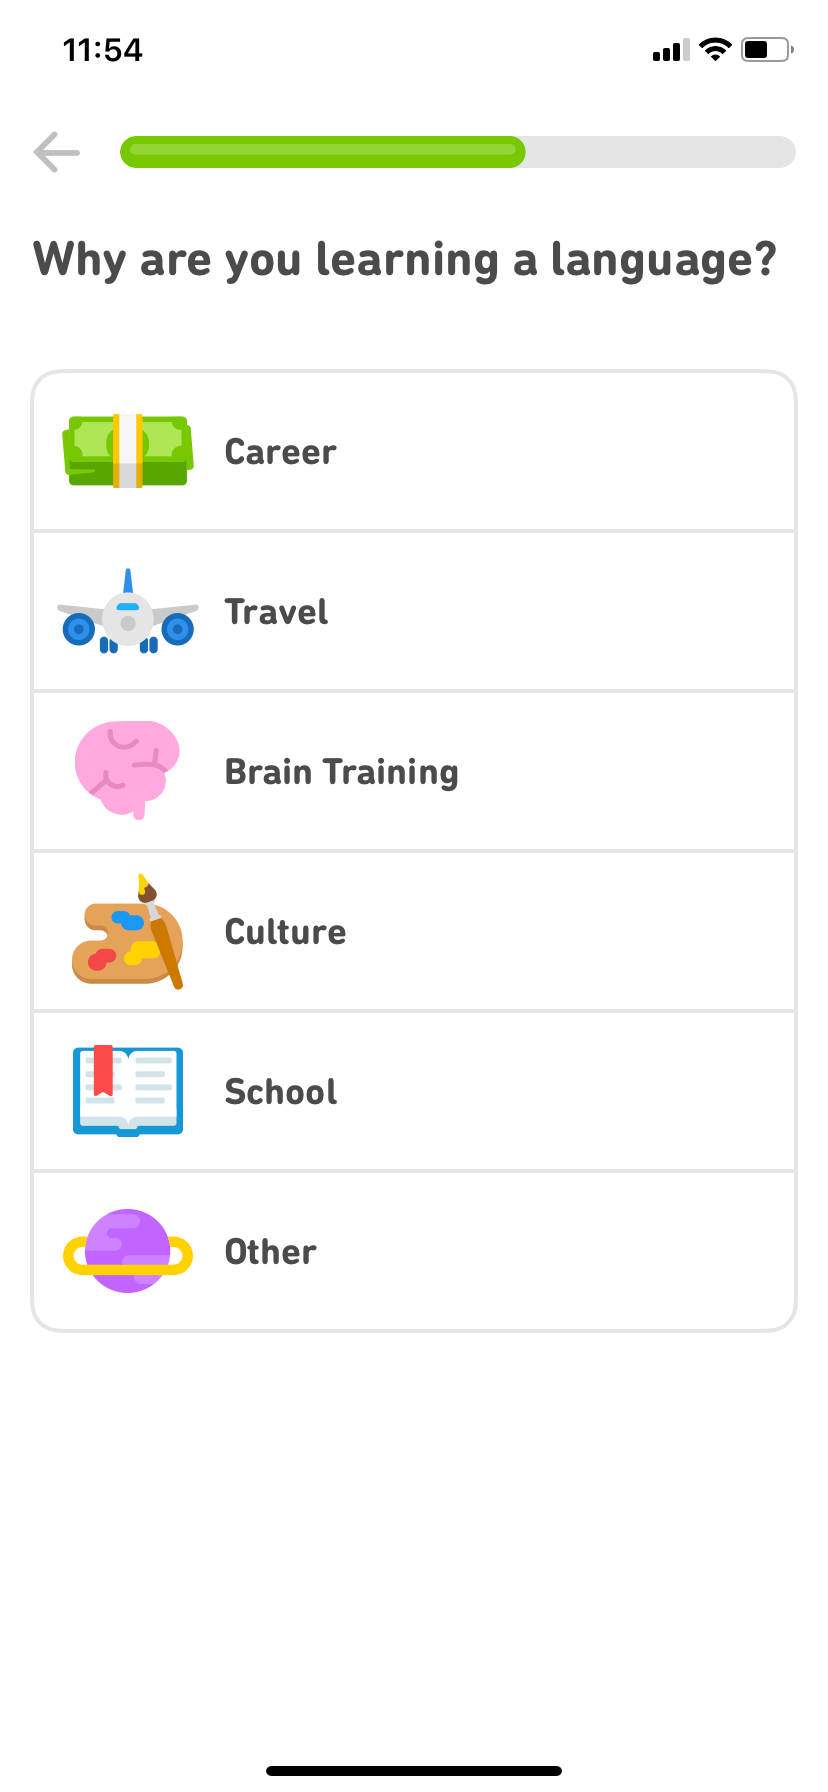 Screenshot of the app asking users “Why do you want to learn a language” with options: Work, Travel, Brain Training, Culture, School.